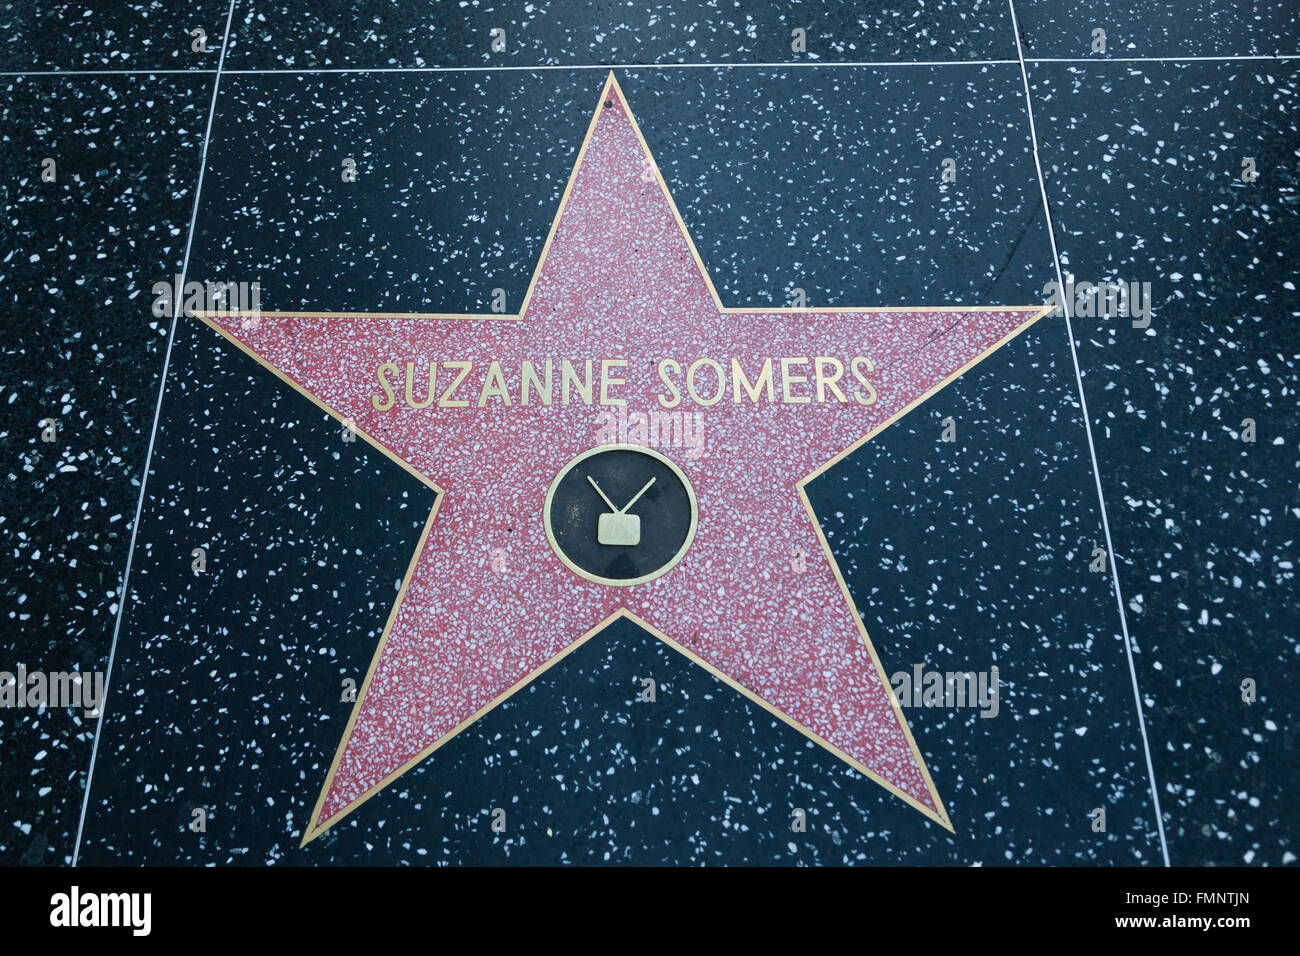 HOLLYWOOD, CALIFORNIA - February 8 2015: Suzanne Somers' Hollywood Walk of Fame star on February 8, 2015 in Hollywood, CA. Stock Photo